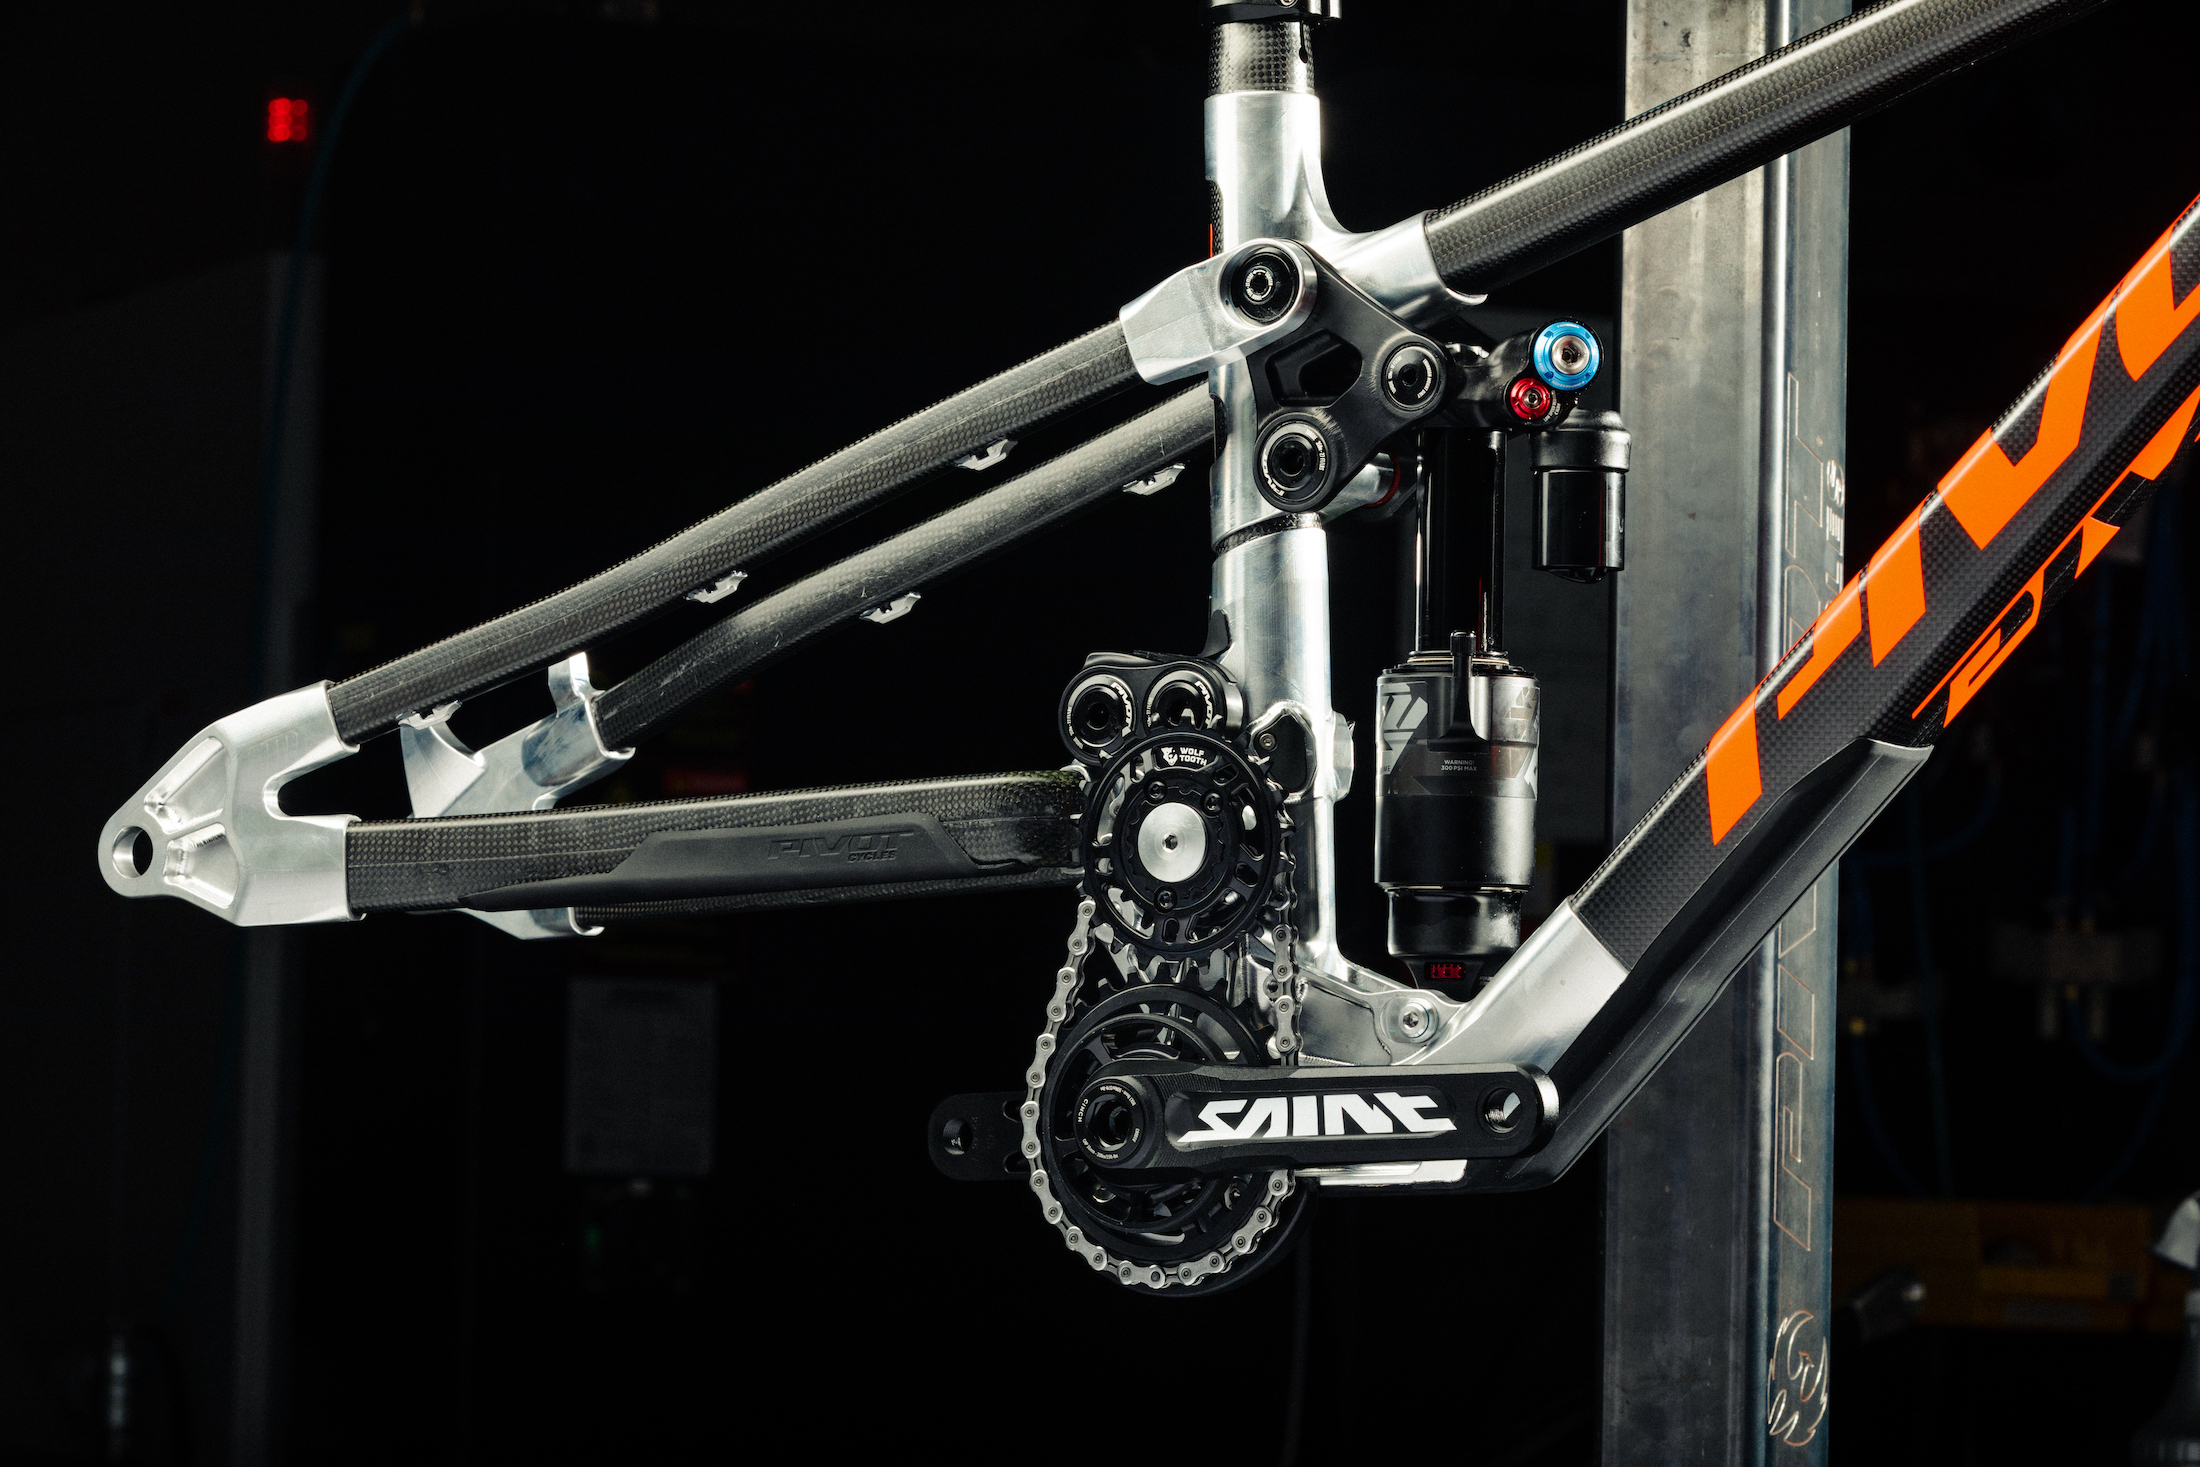 Behindthescenes with Pivot's radical new prototype downhill bikes An interview with Chris